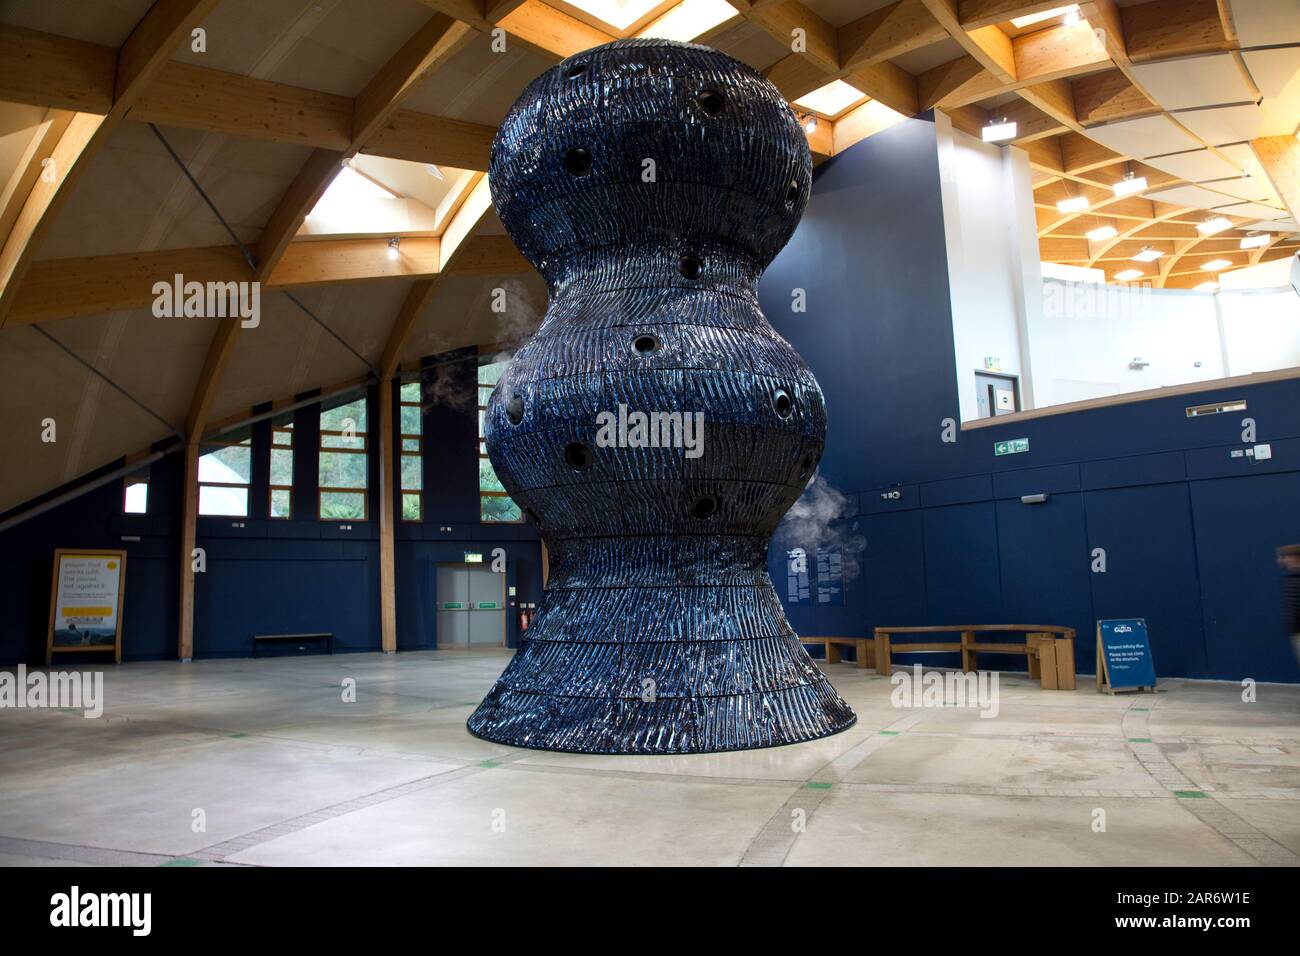 Infinity Blue - huge ceramic breathing sculpture of stromatolite 8.5 metres tall - a massive stack of fossilied cyanobacteria which produces vapour ri Stock Photo